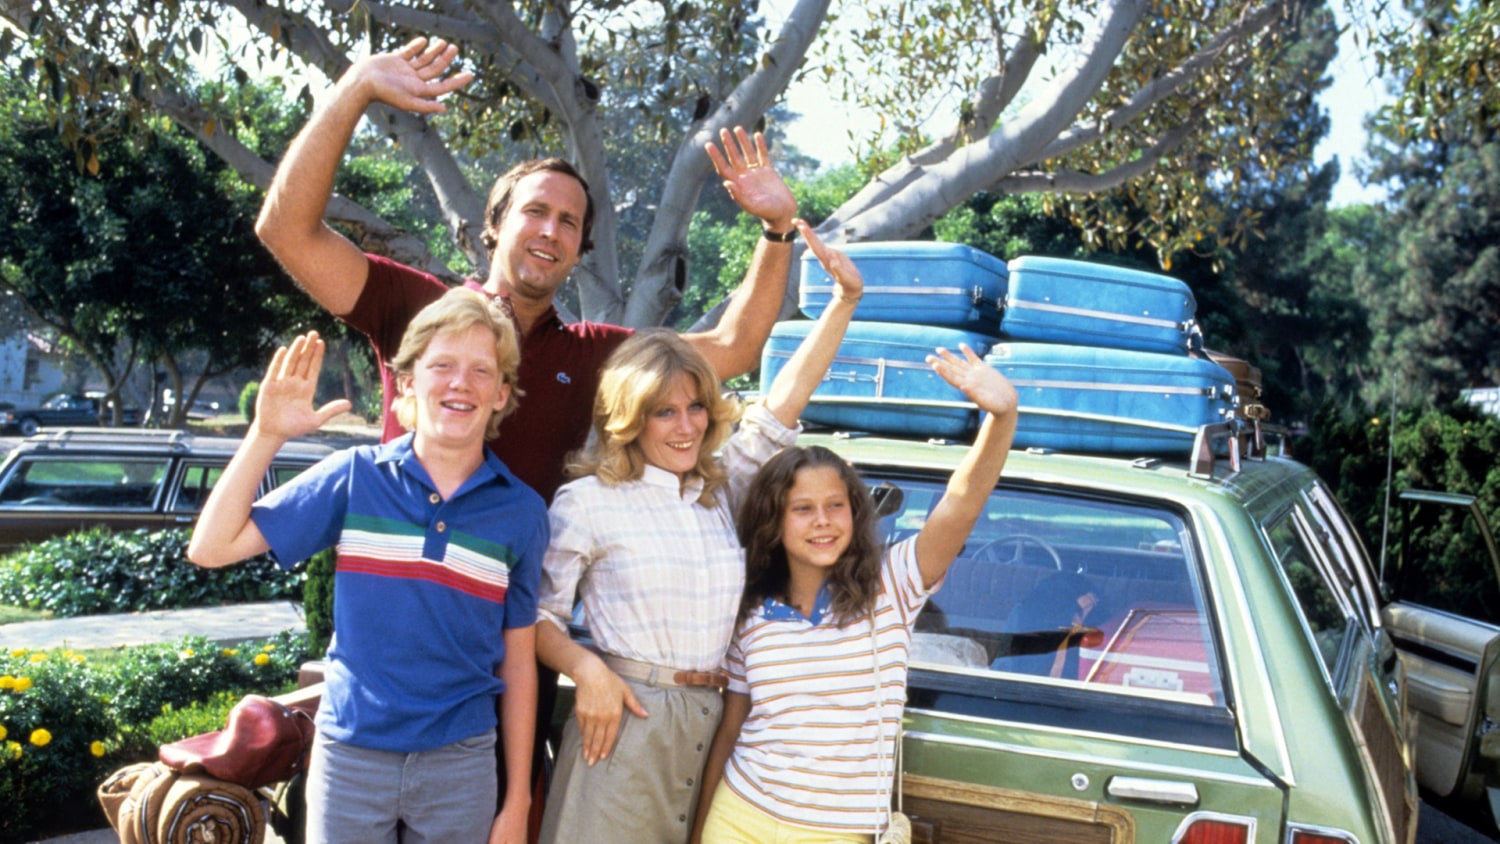 National Lampoon’s Vacation – Griswolds Arrive at Walley World